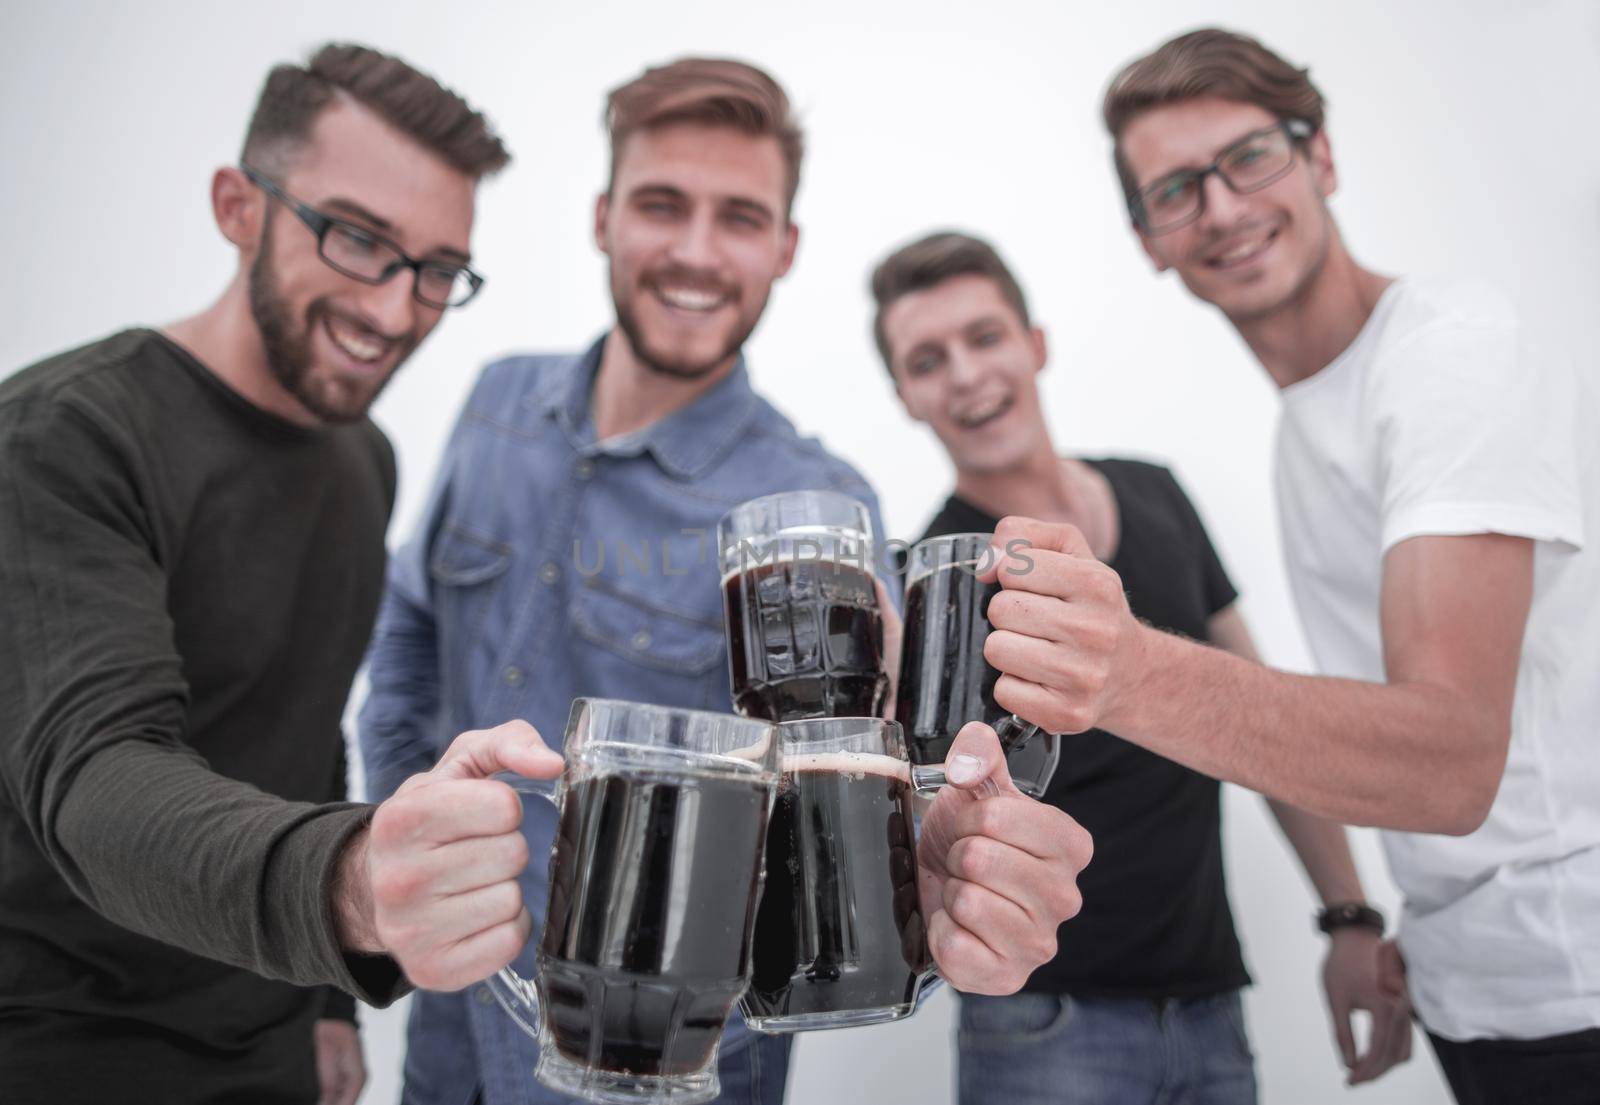 Joyful people holding big beer mug full of beer and looking at camera, isolated on white background